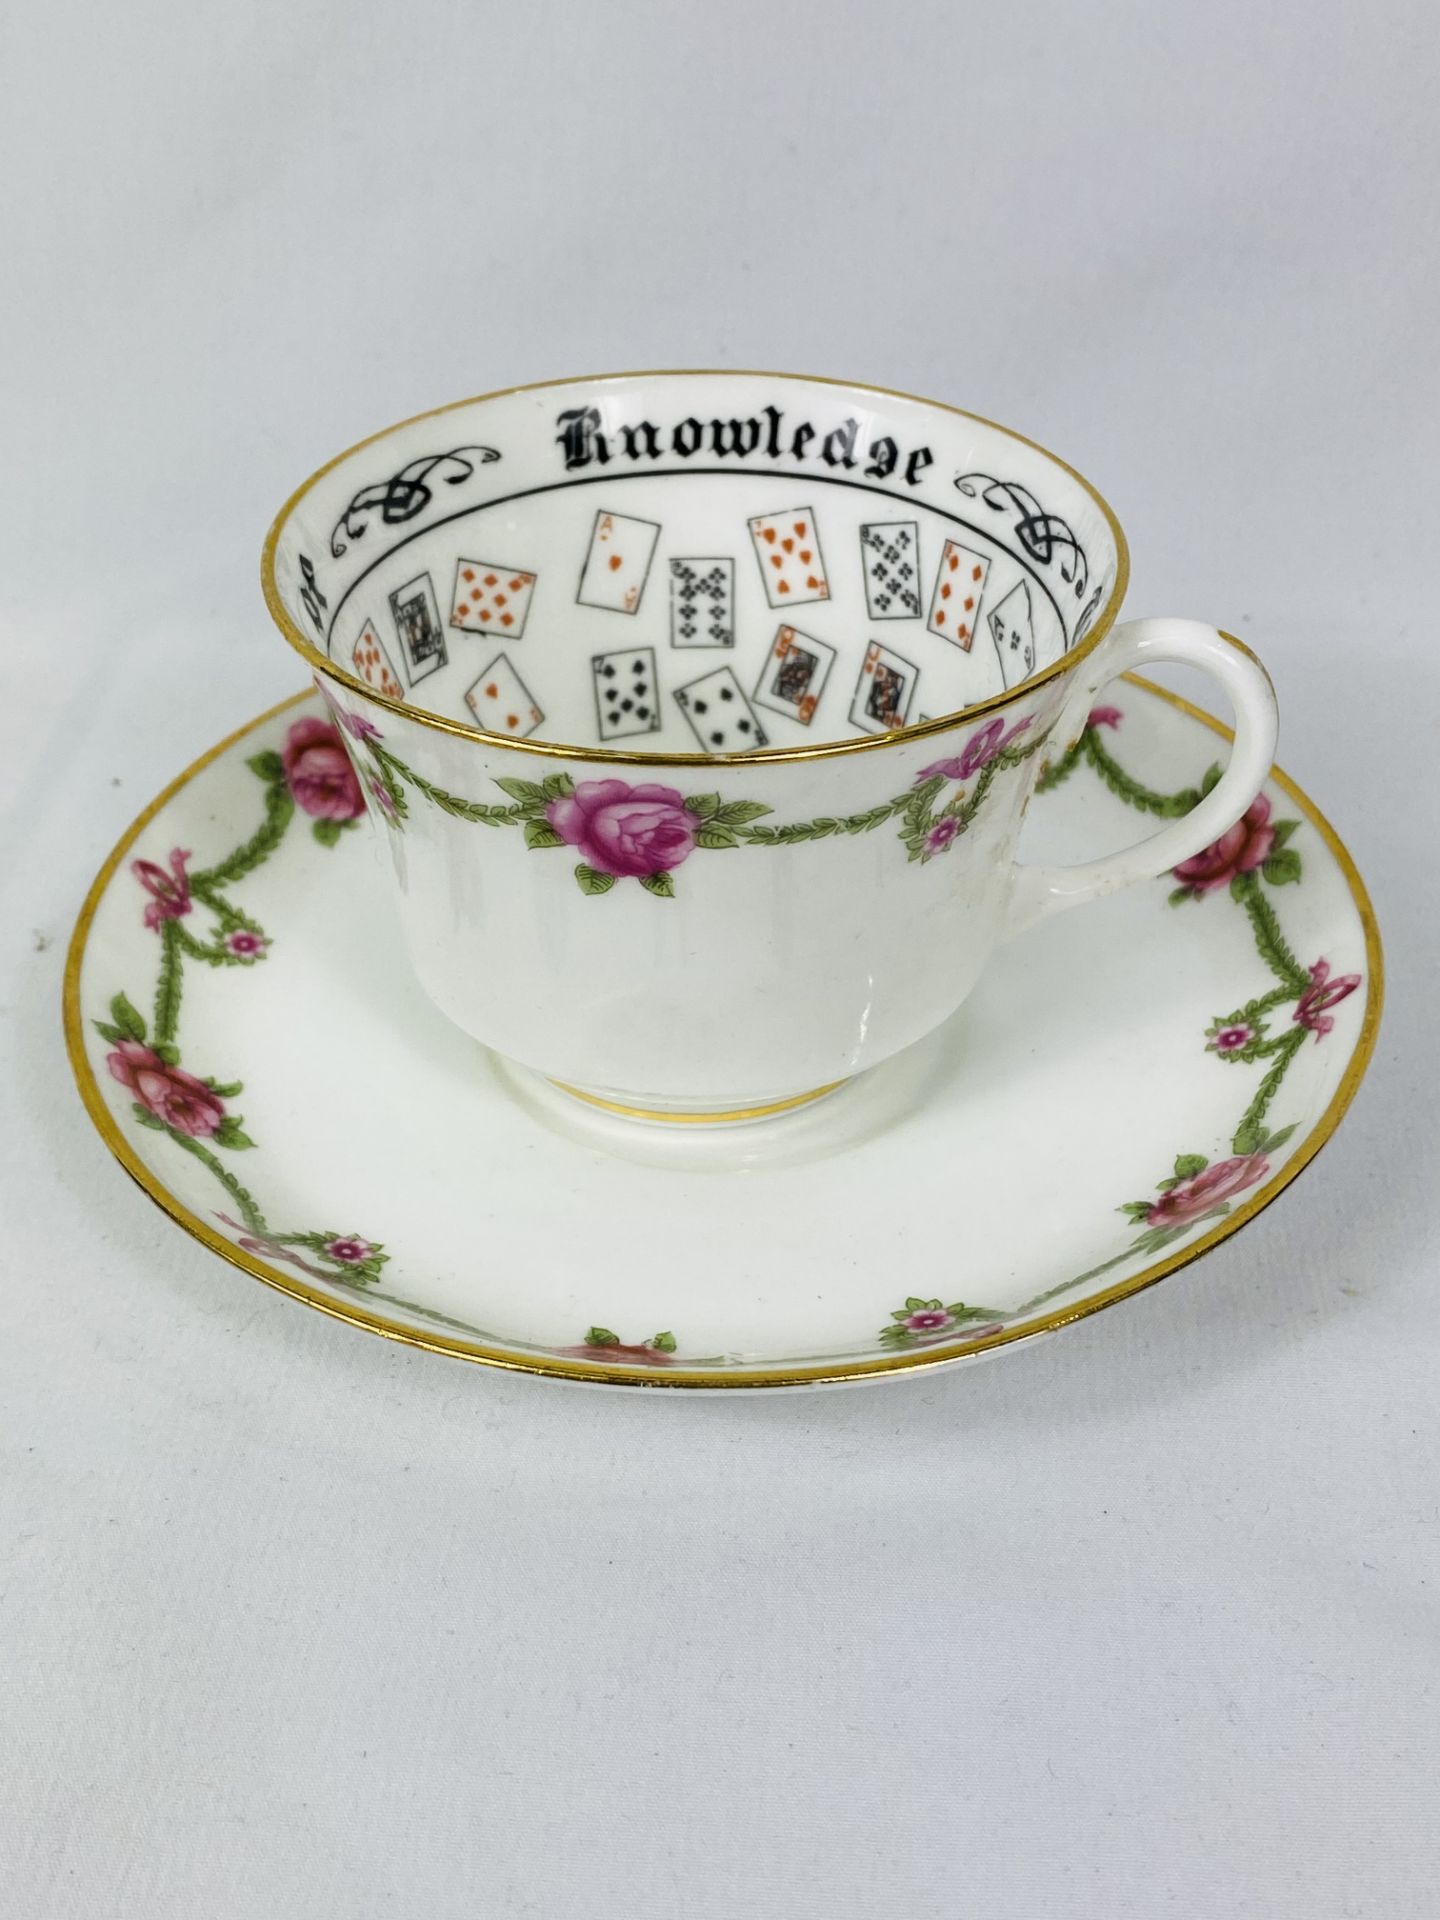 Aynsley 'Cup of Knowledge' - Image 3 of 3